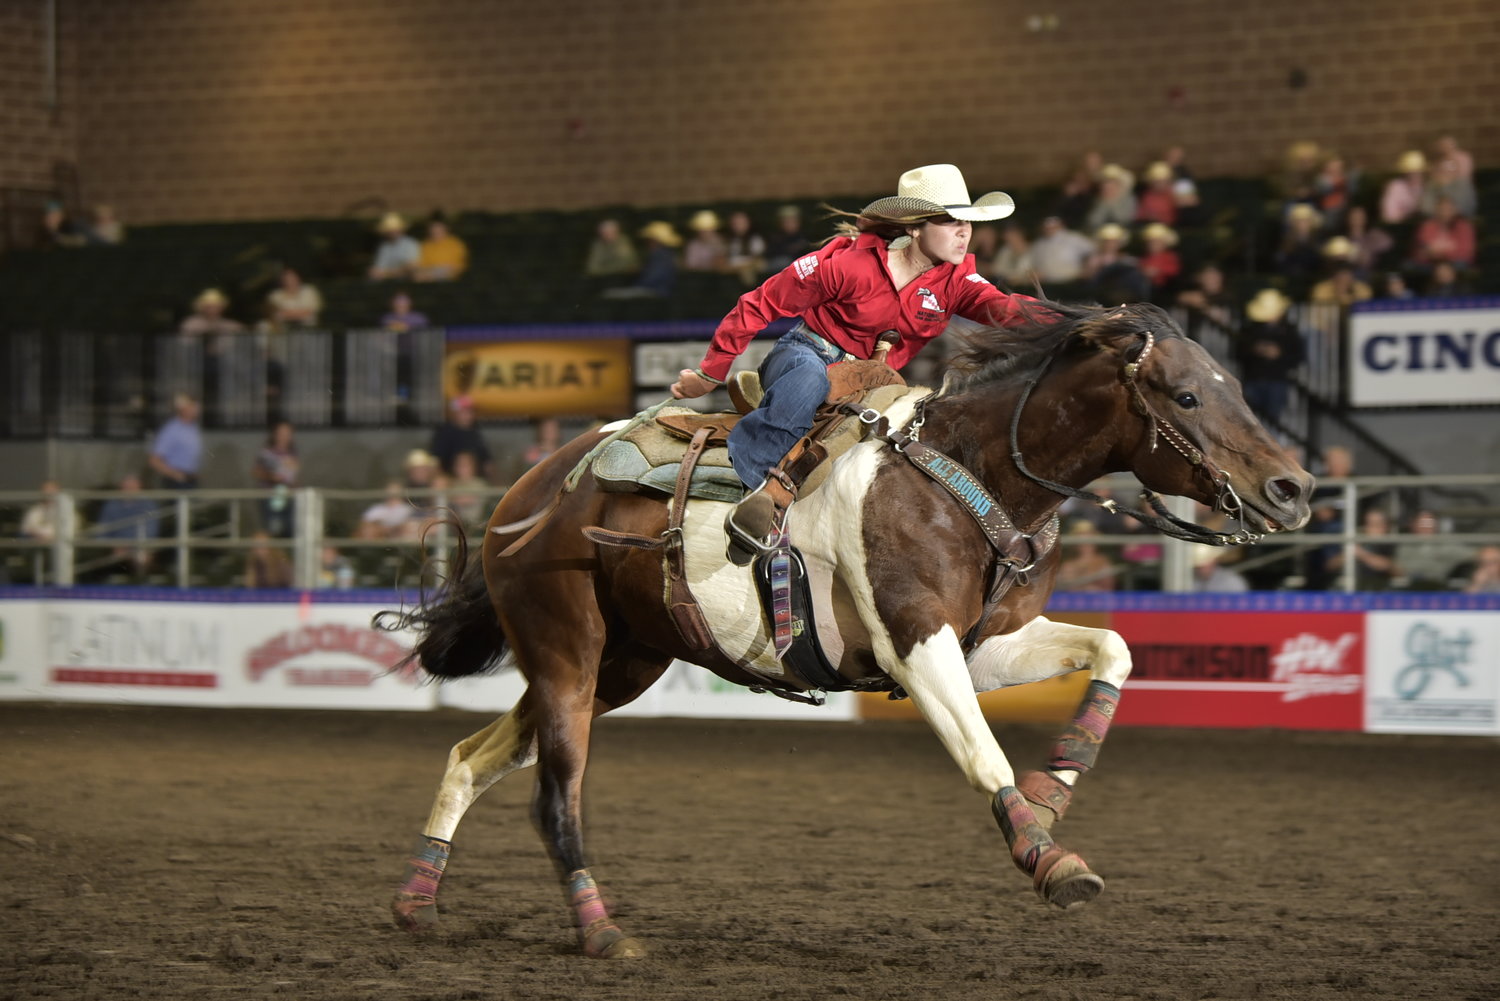 CHAMPION RIDER — Ada Ferrell and her horse race across the ring in one of this year’s rodeo competitions. Ferrell earned top-four placements in multiple categories at the state level and is heading to a national junior high finals event.